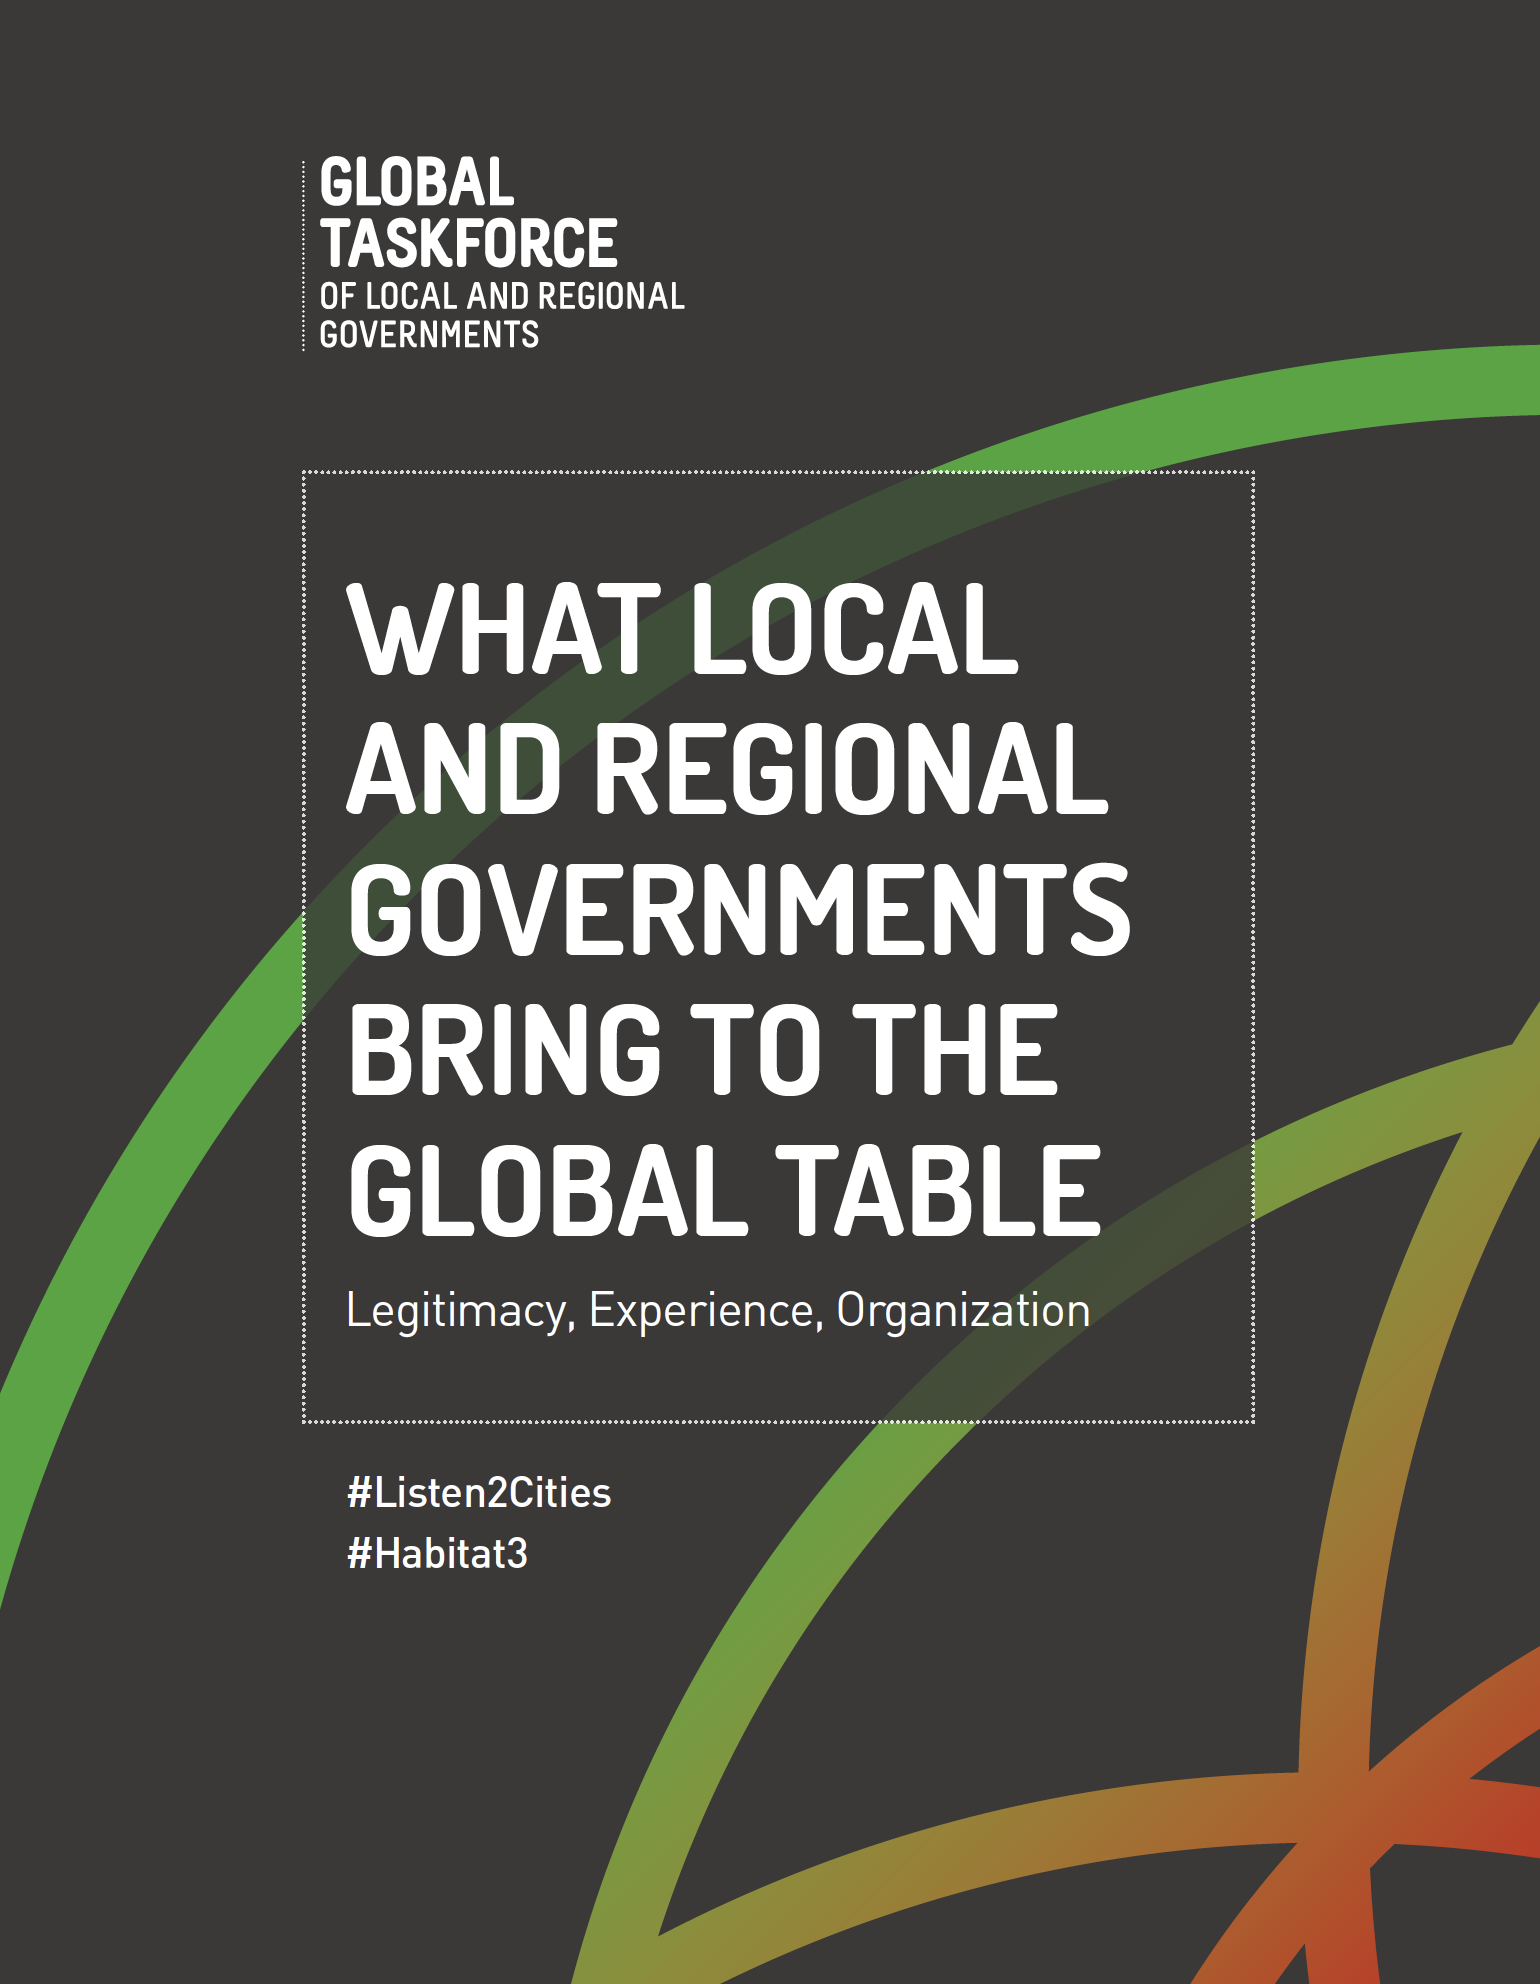 What local and regional governments bring to the global table